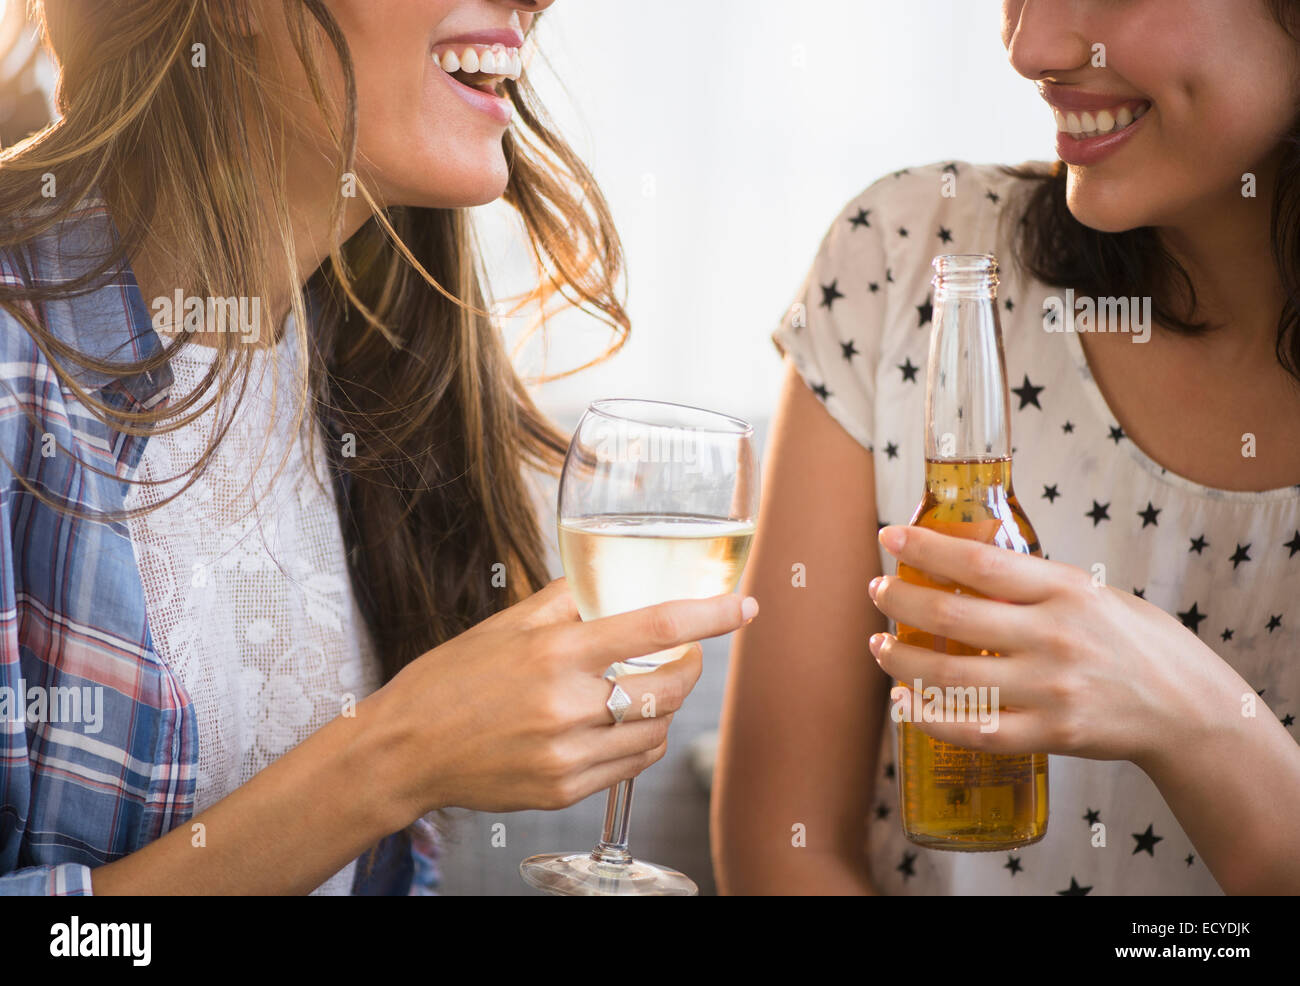 Hispanic women drinking beer and wine together Stock Photo